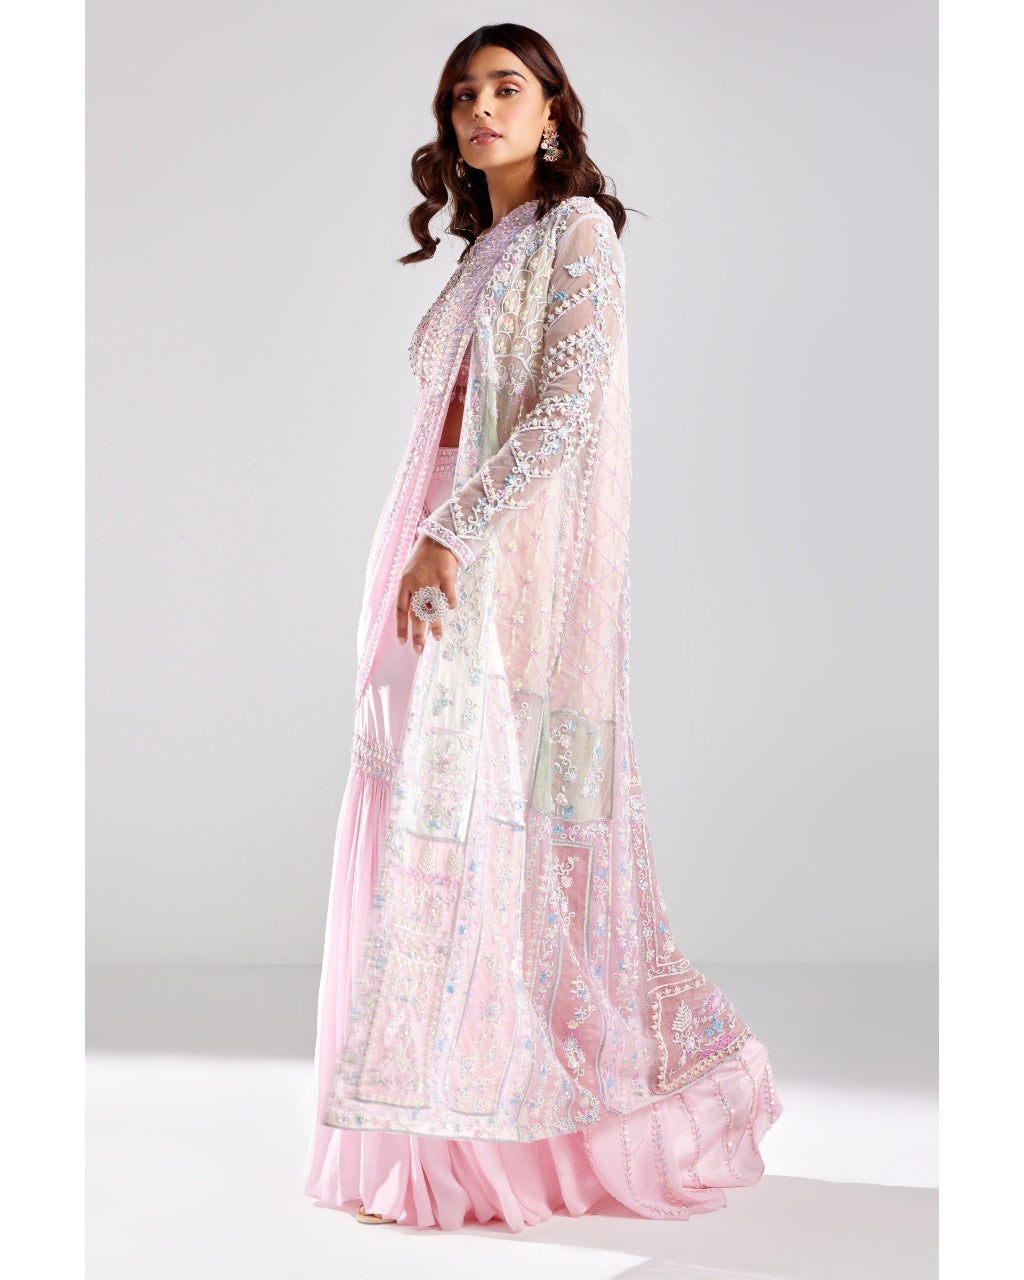 Blush Pink Embroidered Cape With Pant Sari Set